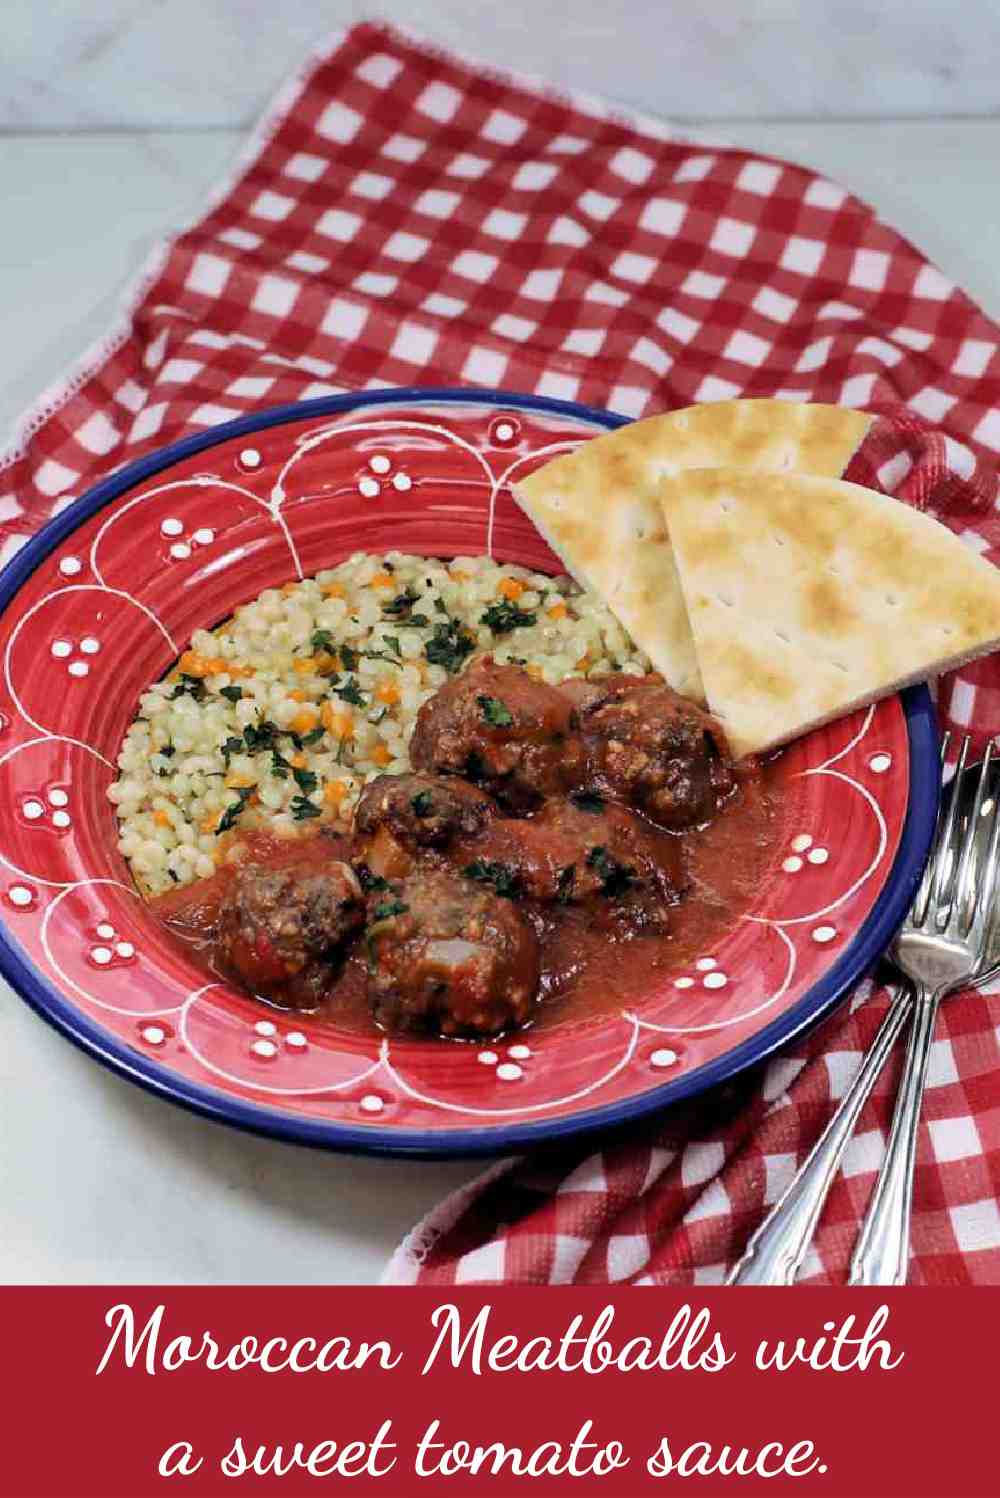 Red plant with meatballs and couscous and pita bread with words Moroccan meatballs with a sweet tomato sauce.